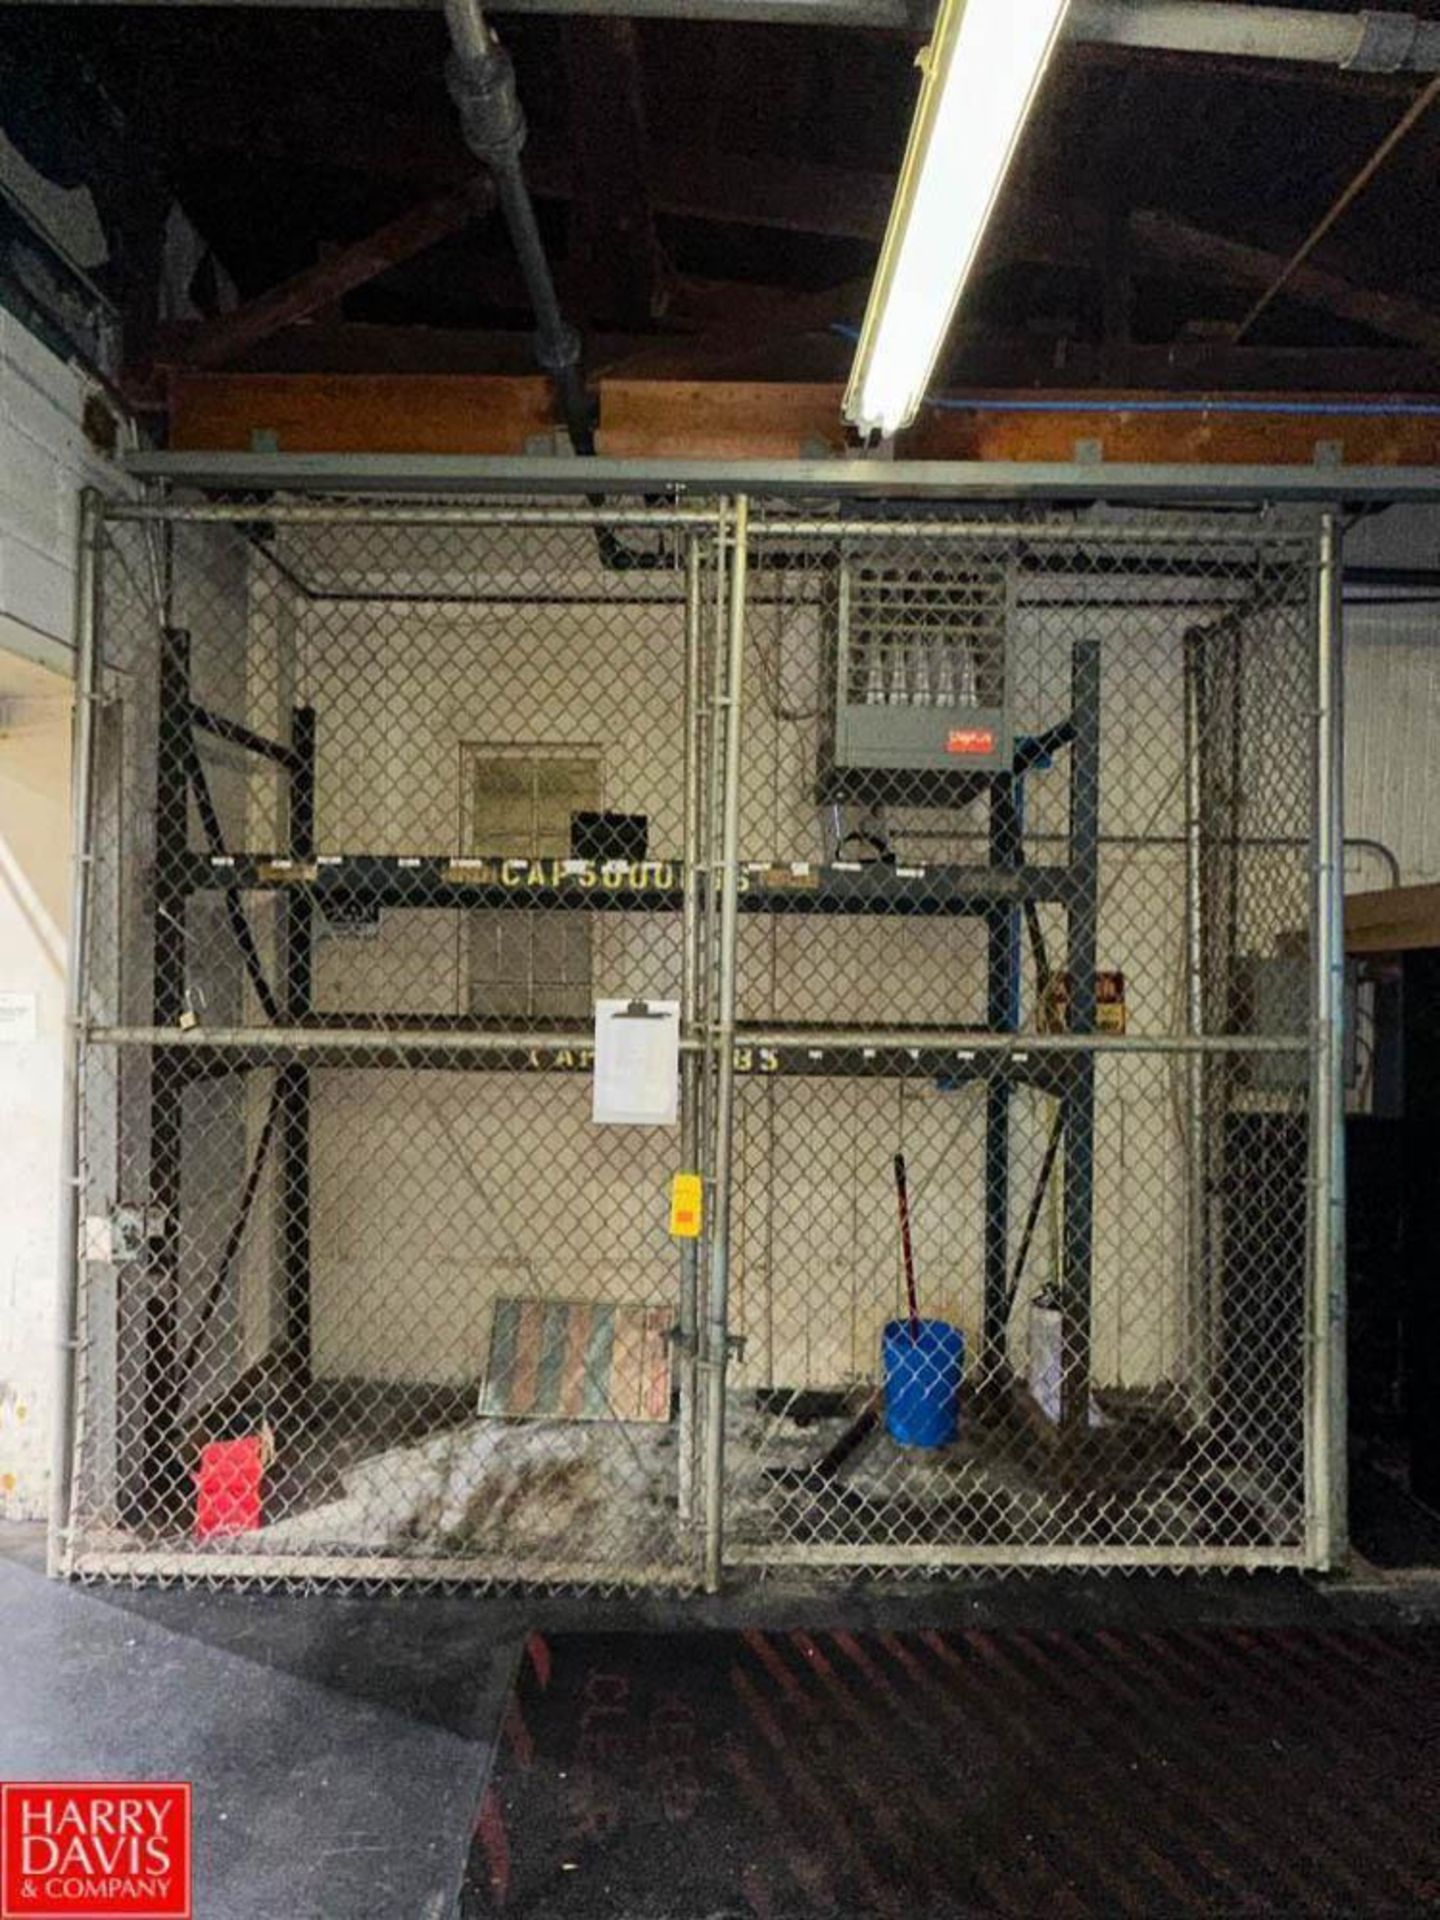 Pallet Racking Section: 9' x 8' and (2) Sliding Chain Link Fence Sections: 10' x 6'